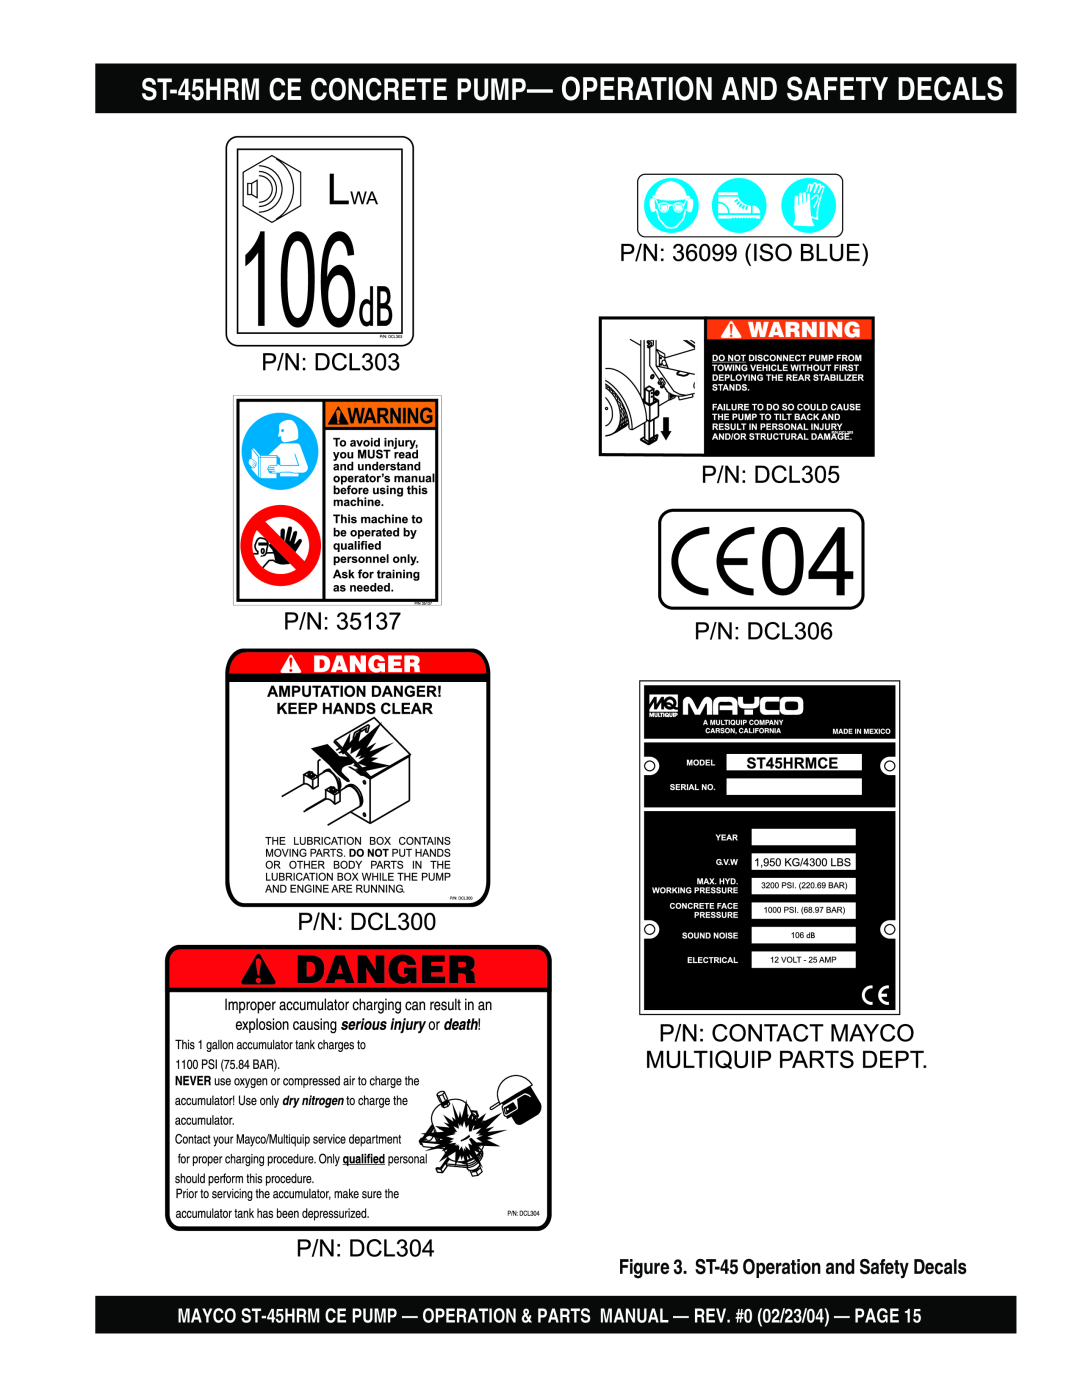 Multiquip ST-45HRM CE manual ST-45Operation and Safety Decals 